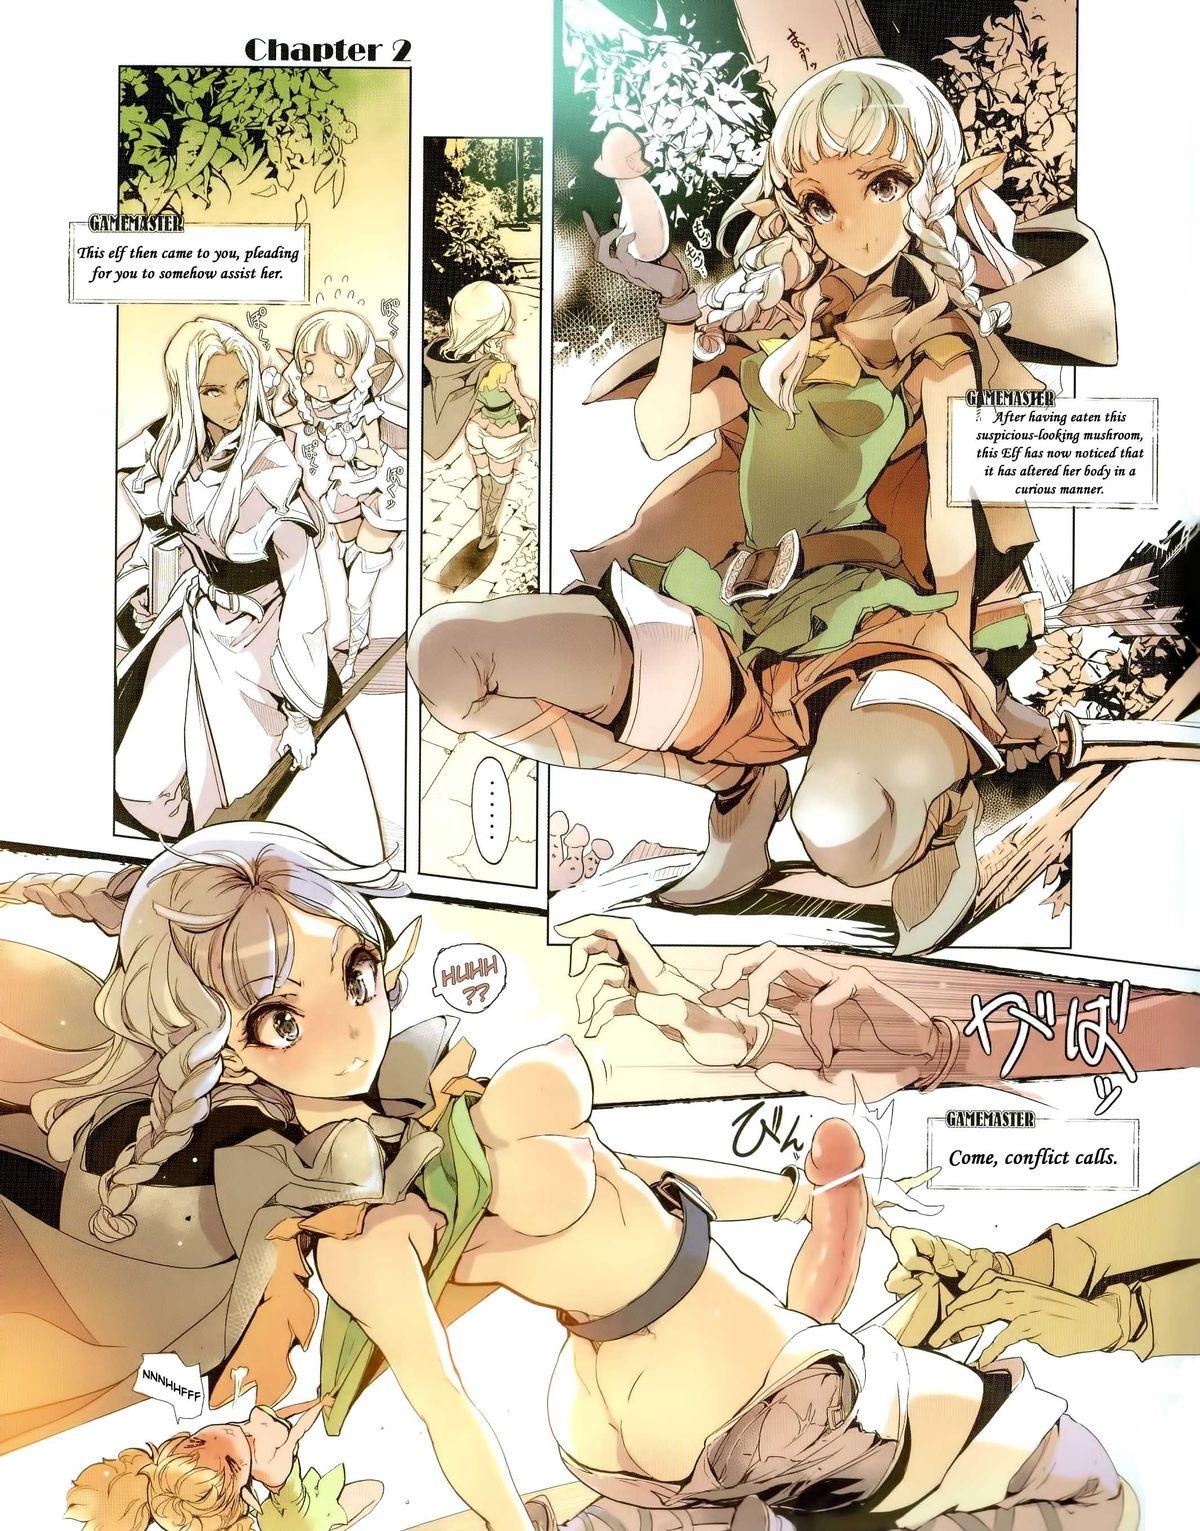 Youth Porn D&! -DRAGON & ! - Dragons crown Celebrity Nudes - Page 5